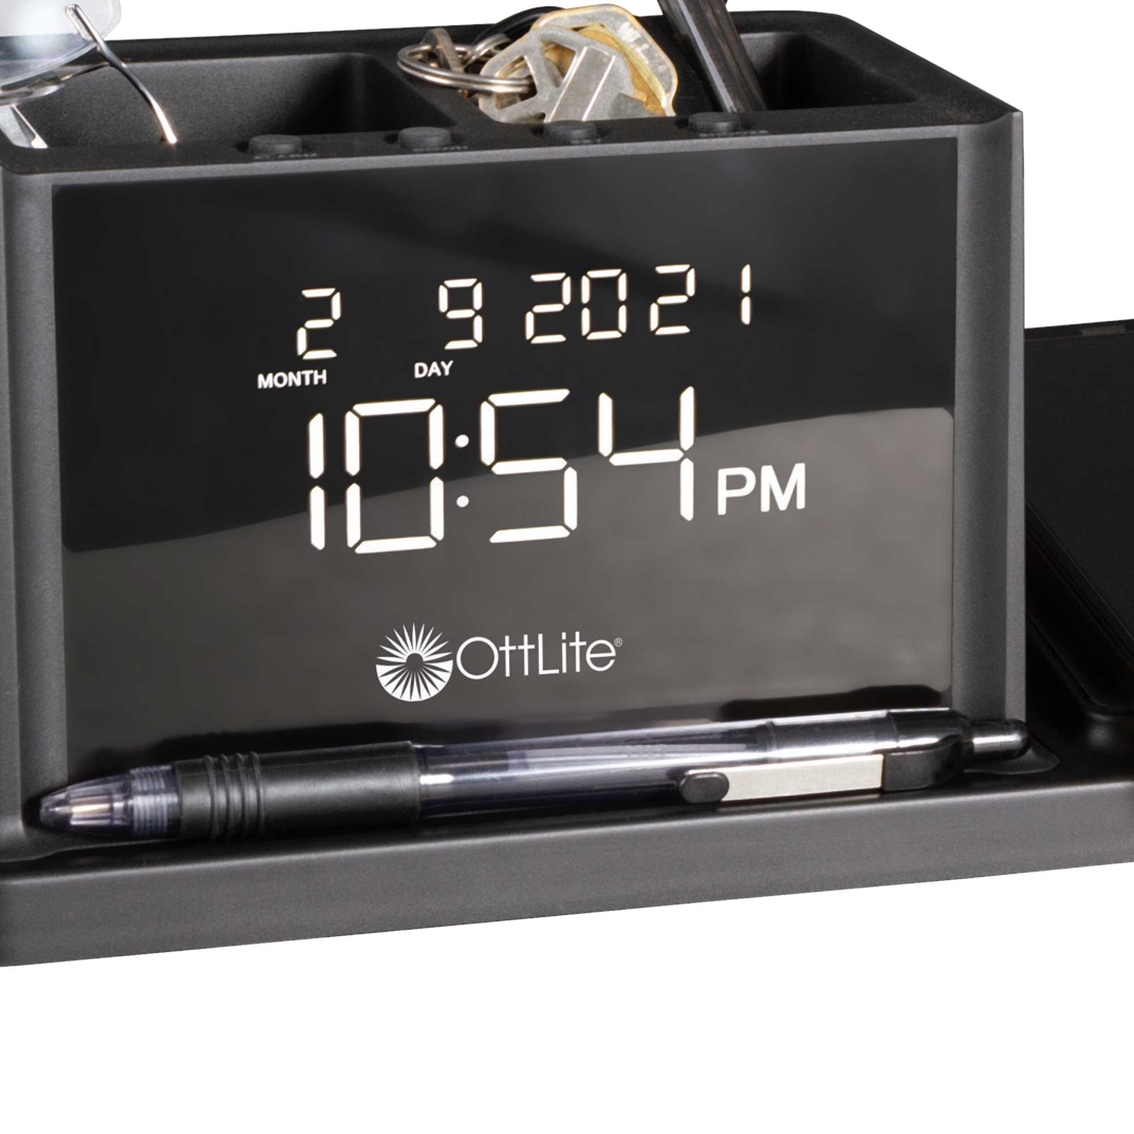 Ottlite Organizer with Clock and Wireless Charging - Image 2 of 3